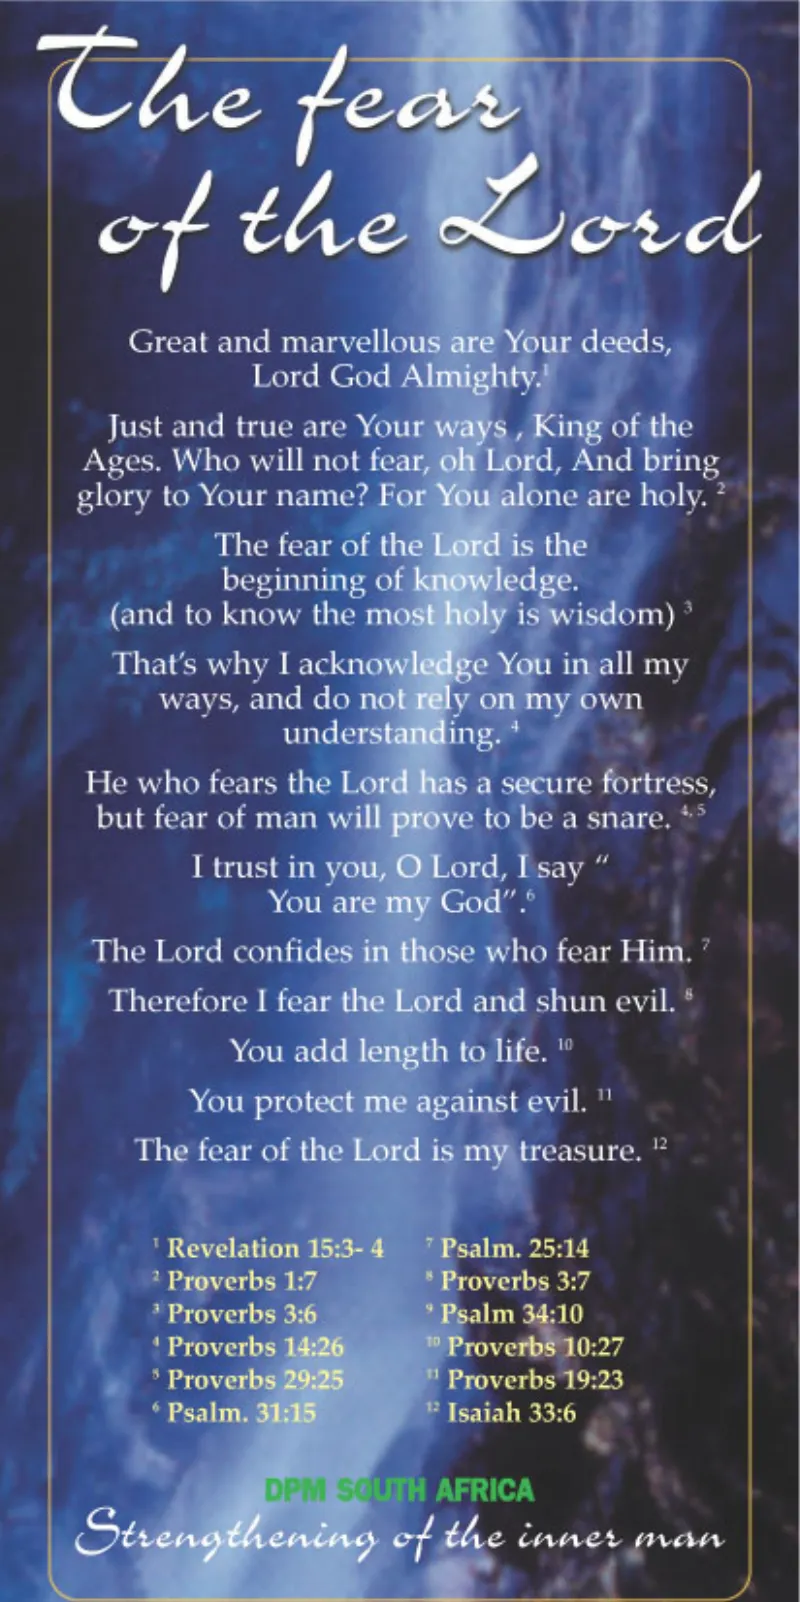 Proclamation - The Fear of the Lord